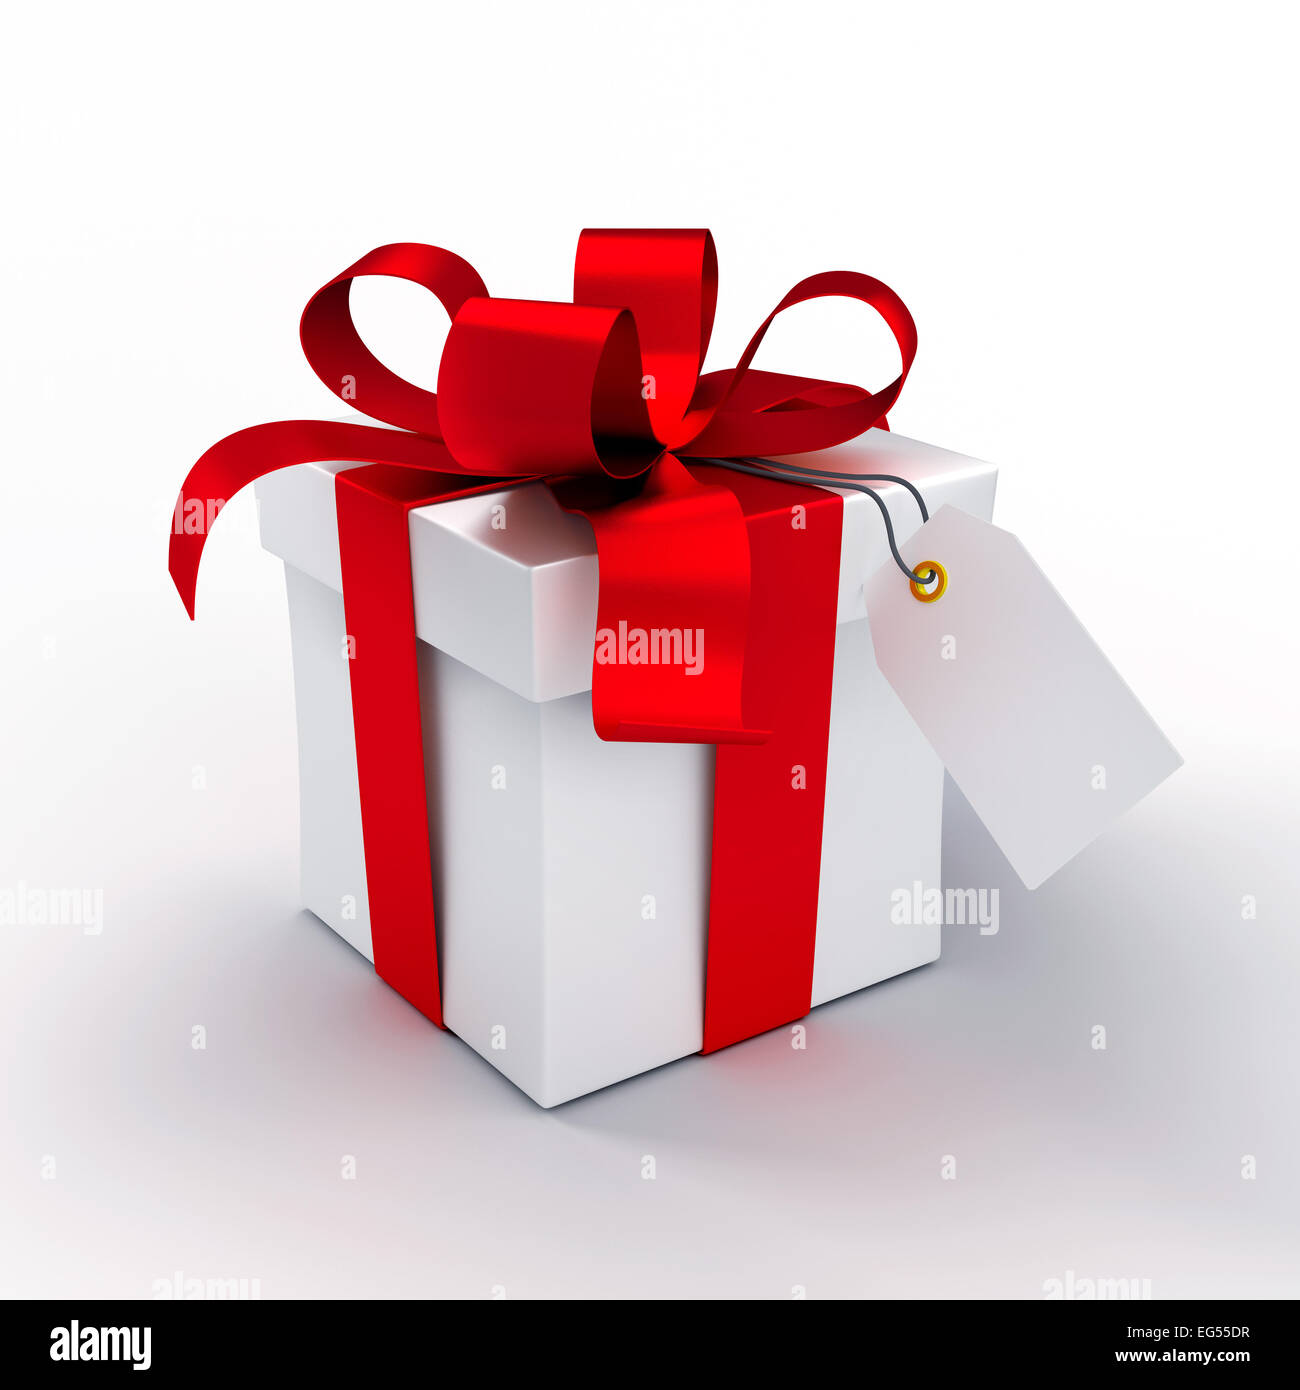 White gift box tied up with red ribbons, isolated on white Stock Photo